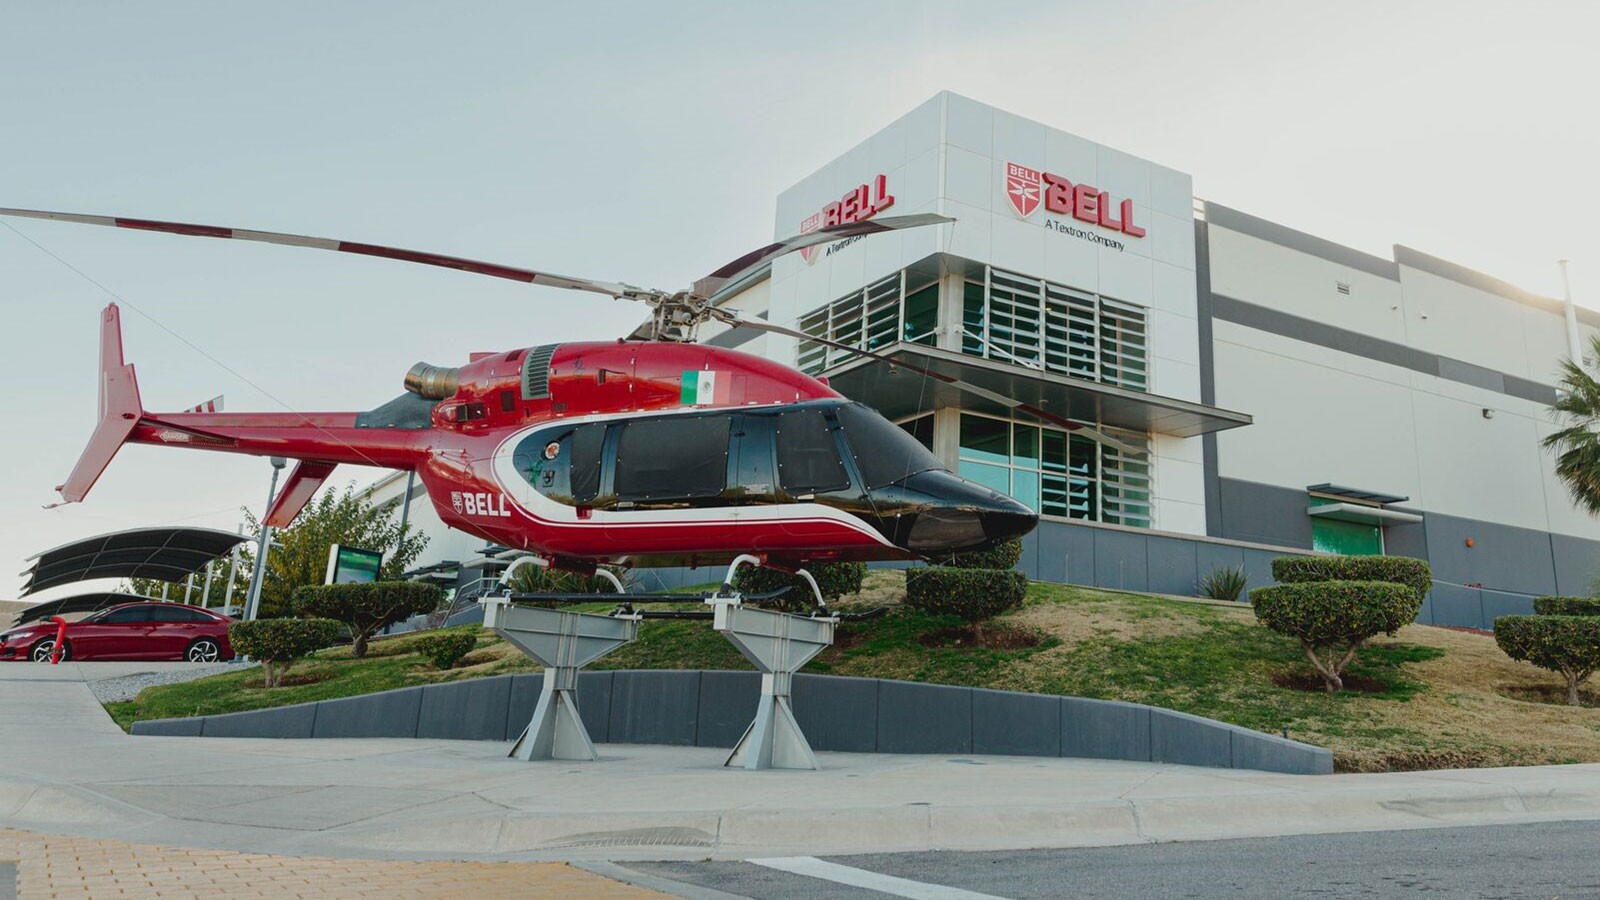 A helicopter installed outside a Bell facility in Chihuahua, Mexico.